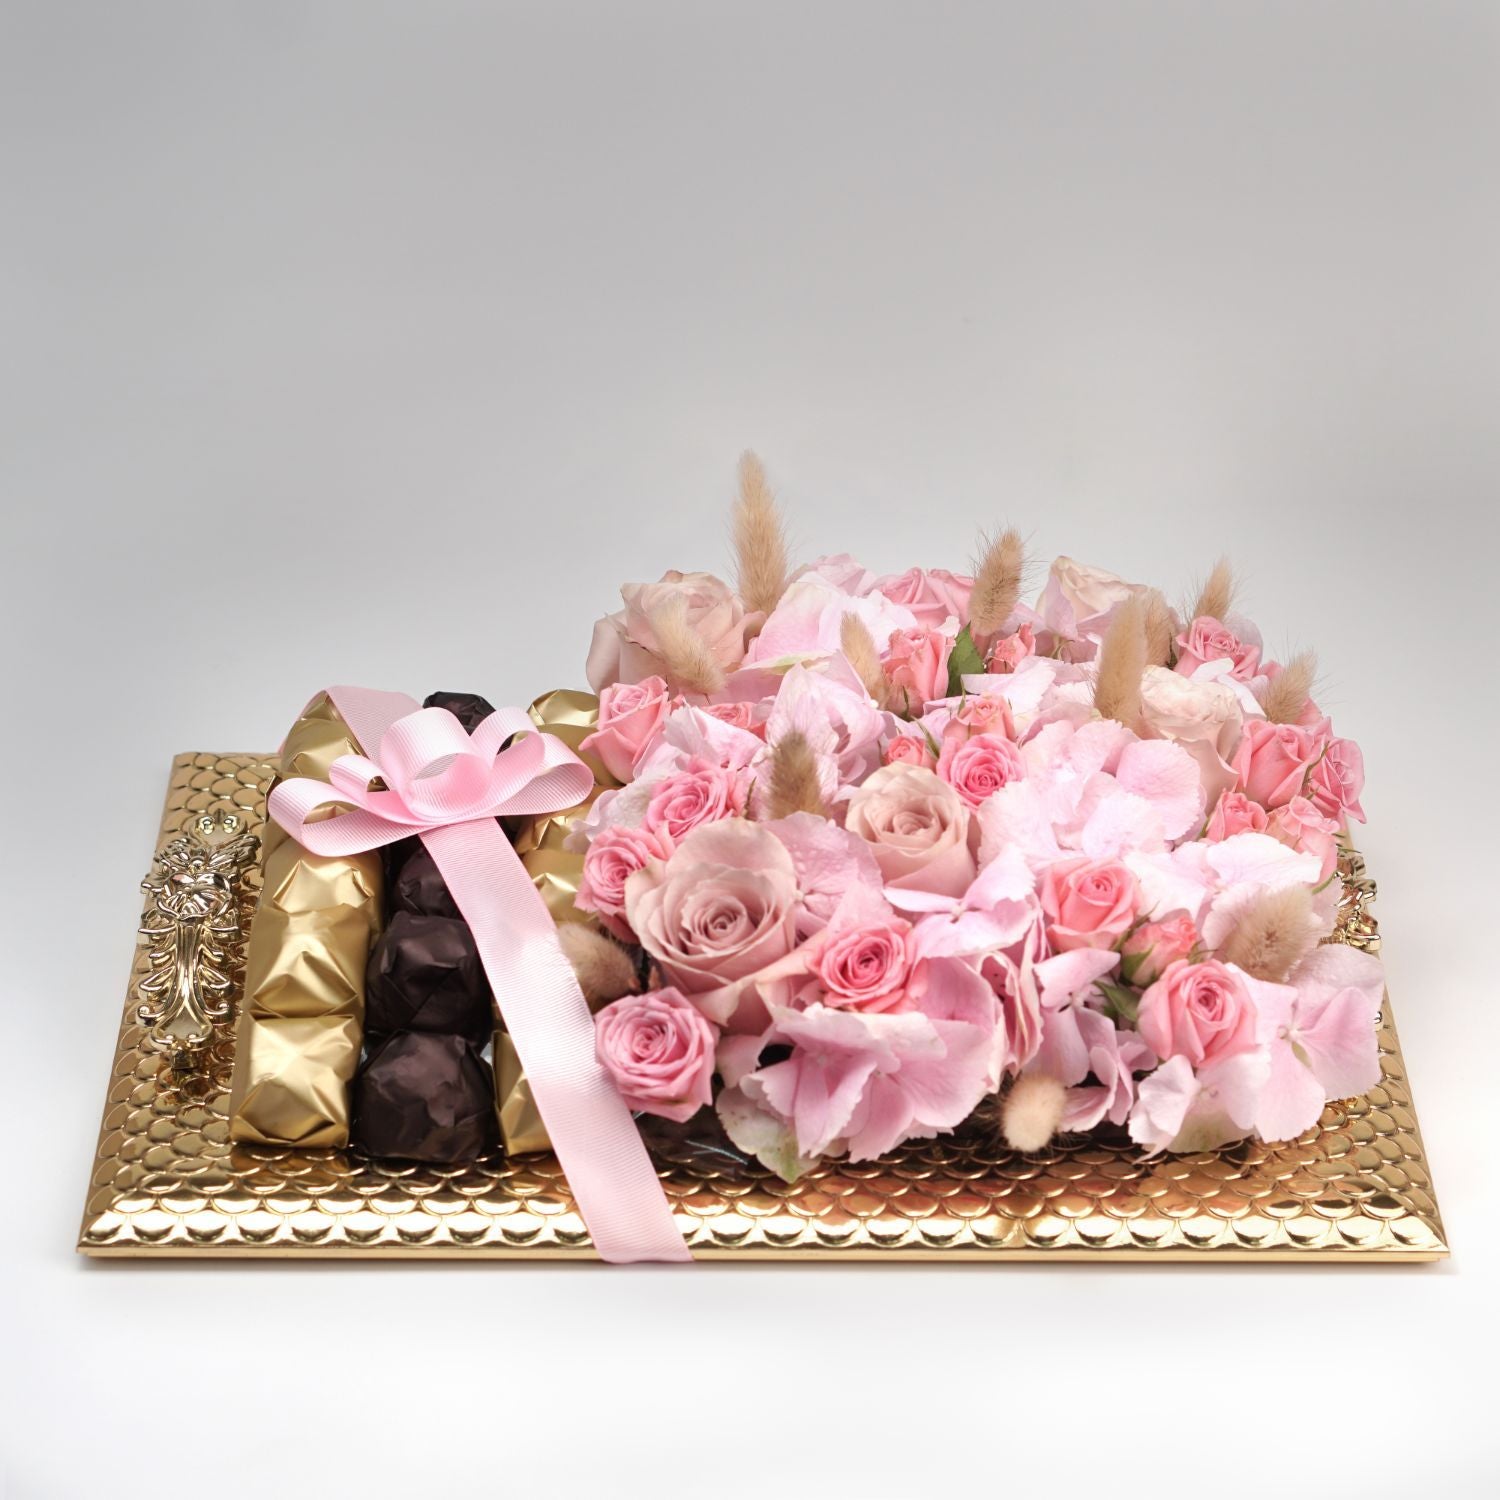 Blissful Mixed Flowers & Chocolates Golden Tray